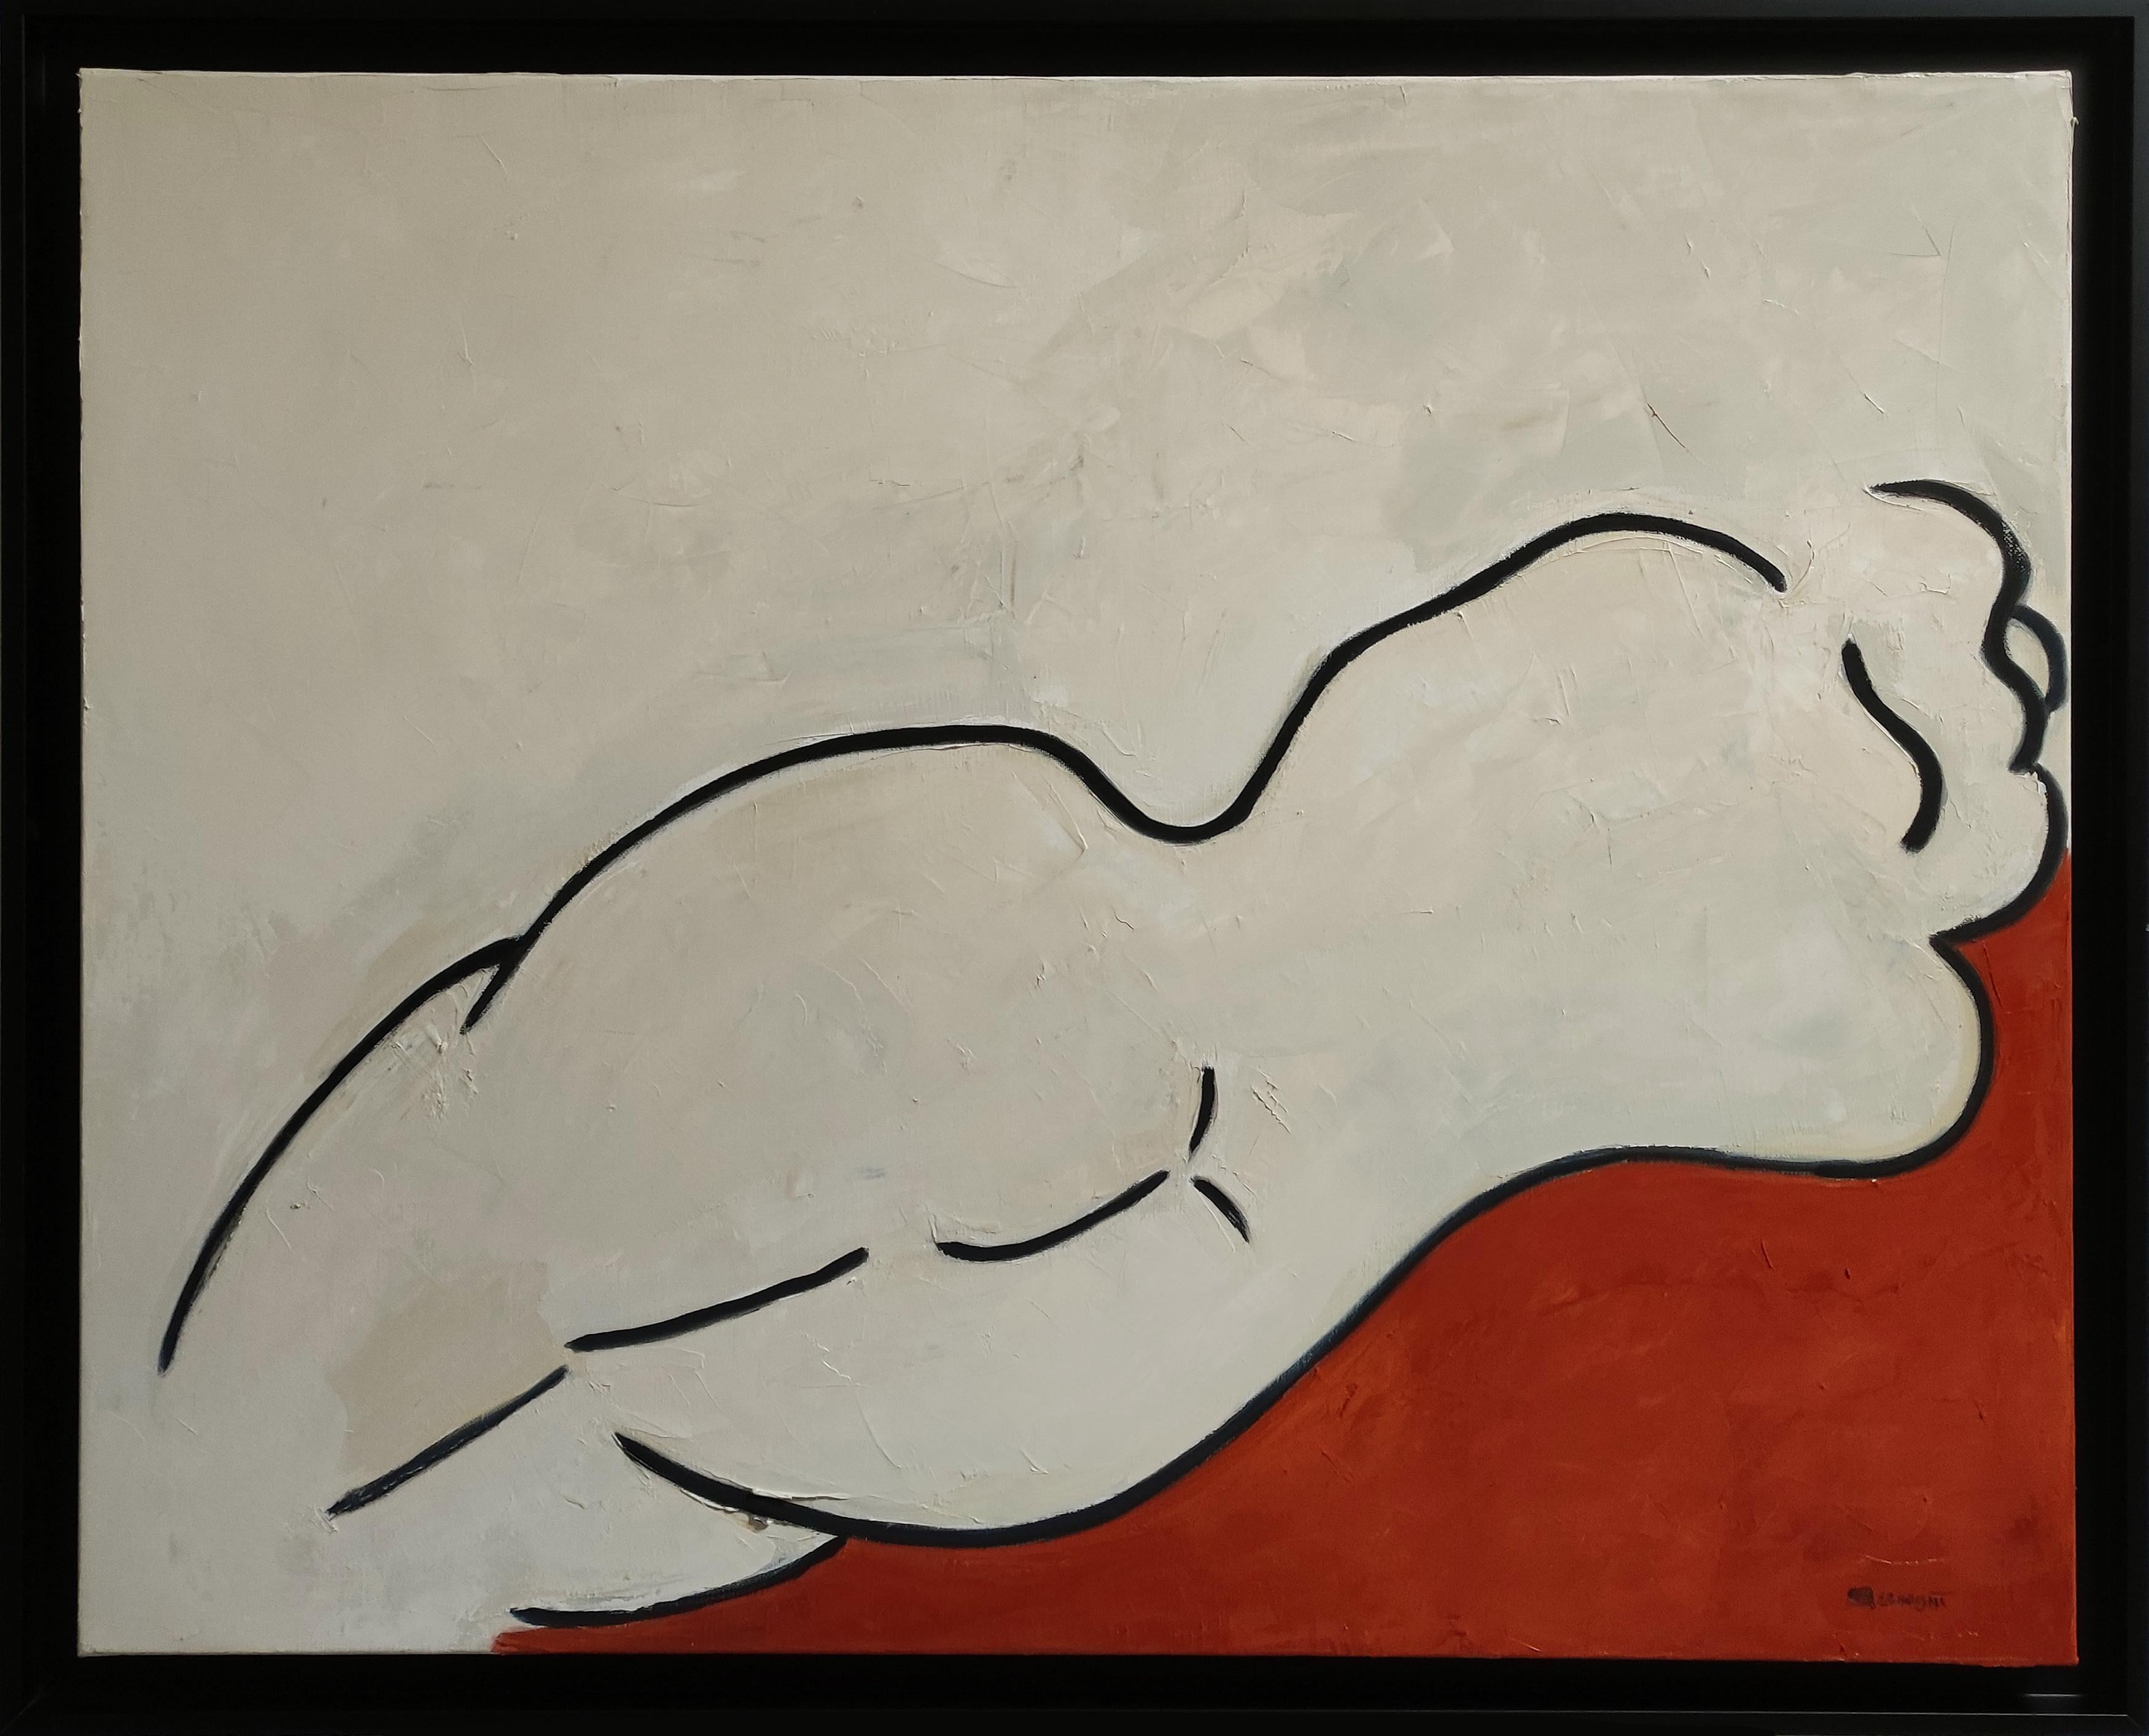 Courbes, nude woman, figurative modern, oil on canvas, contemporary, minimalism